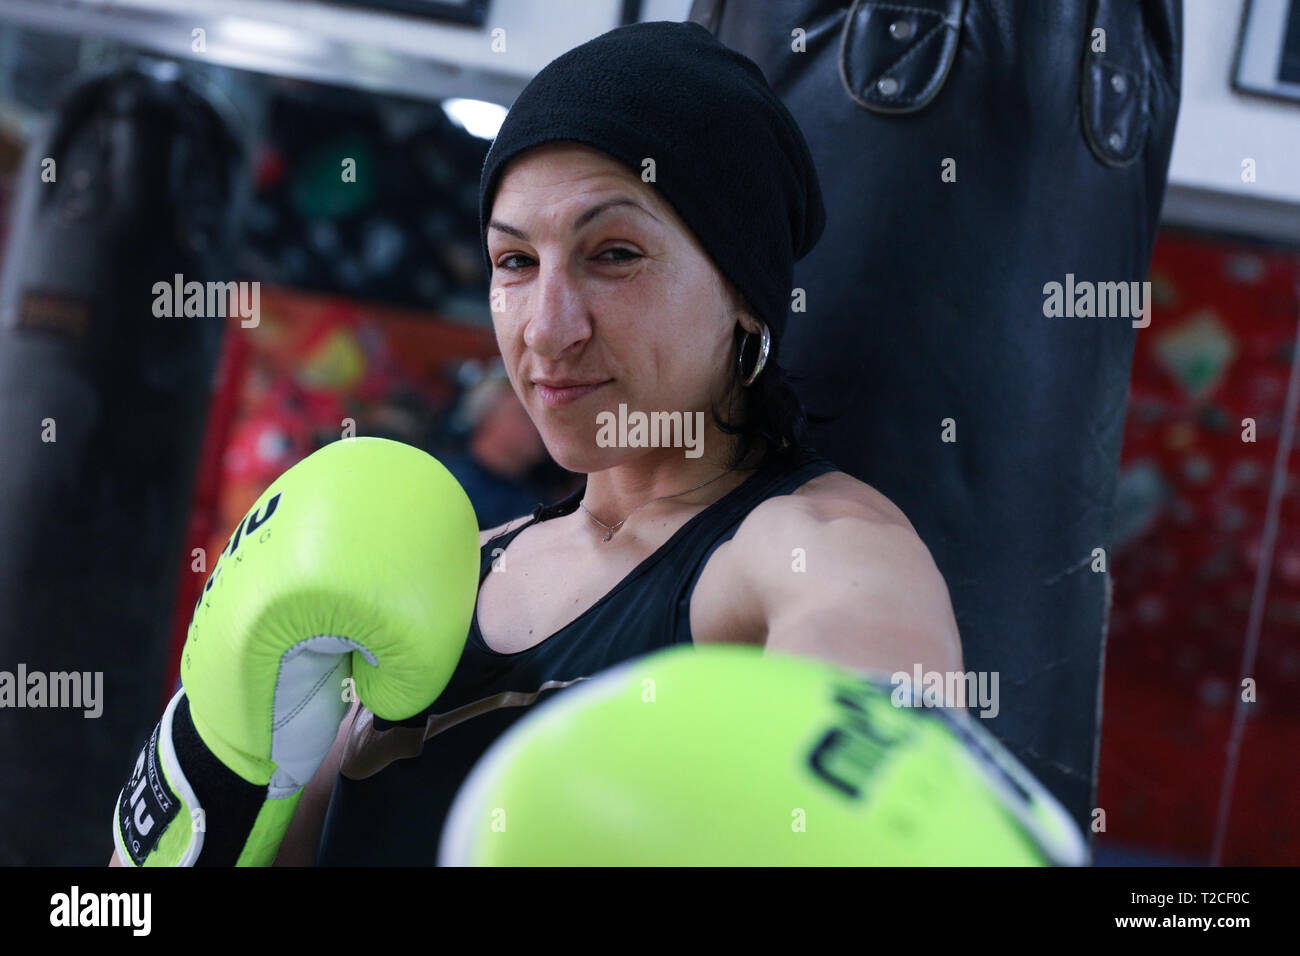 Madrid, Spain. 01st Apr, 2019. The European boxing champion, Miriam Guitierrez. during the visit of the Popular Party (PP) Candidate for the Presidency of the Community of Madrid, Isabel Diaz-Ayuso. Credit: Jesús Hellin/Alamy Live News Stock Photo